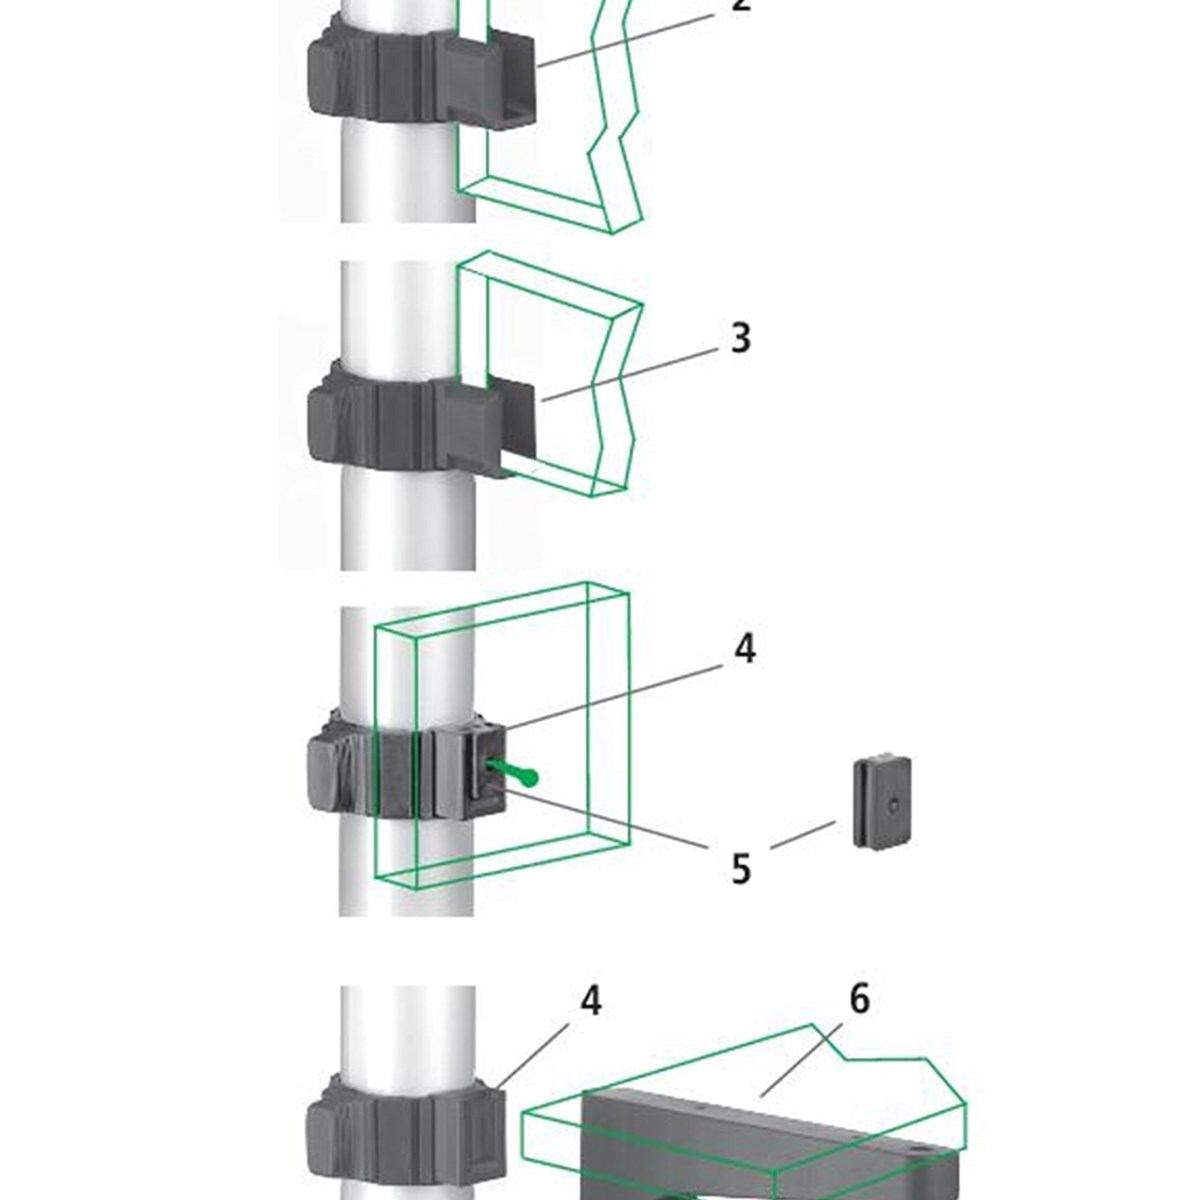 The clamping-ring system Bild